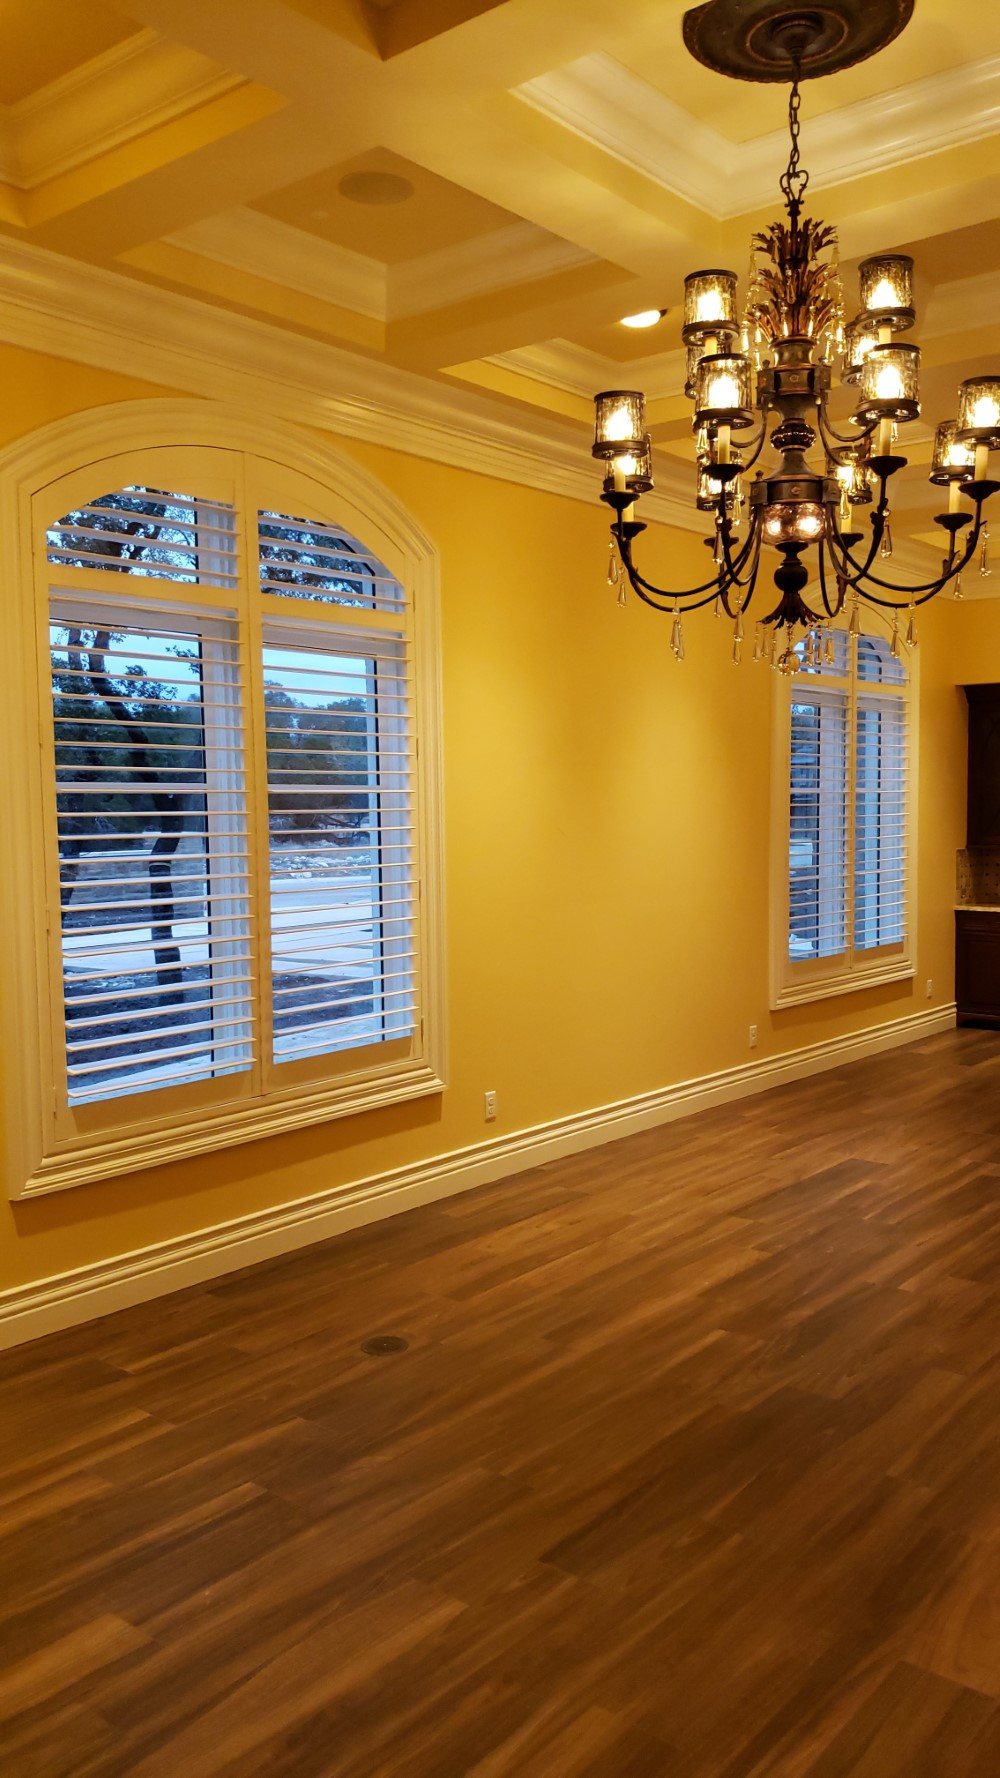 Latest Projects - Elegant Painted Wood Shutters in Shavano Park, TX